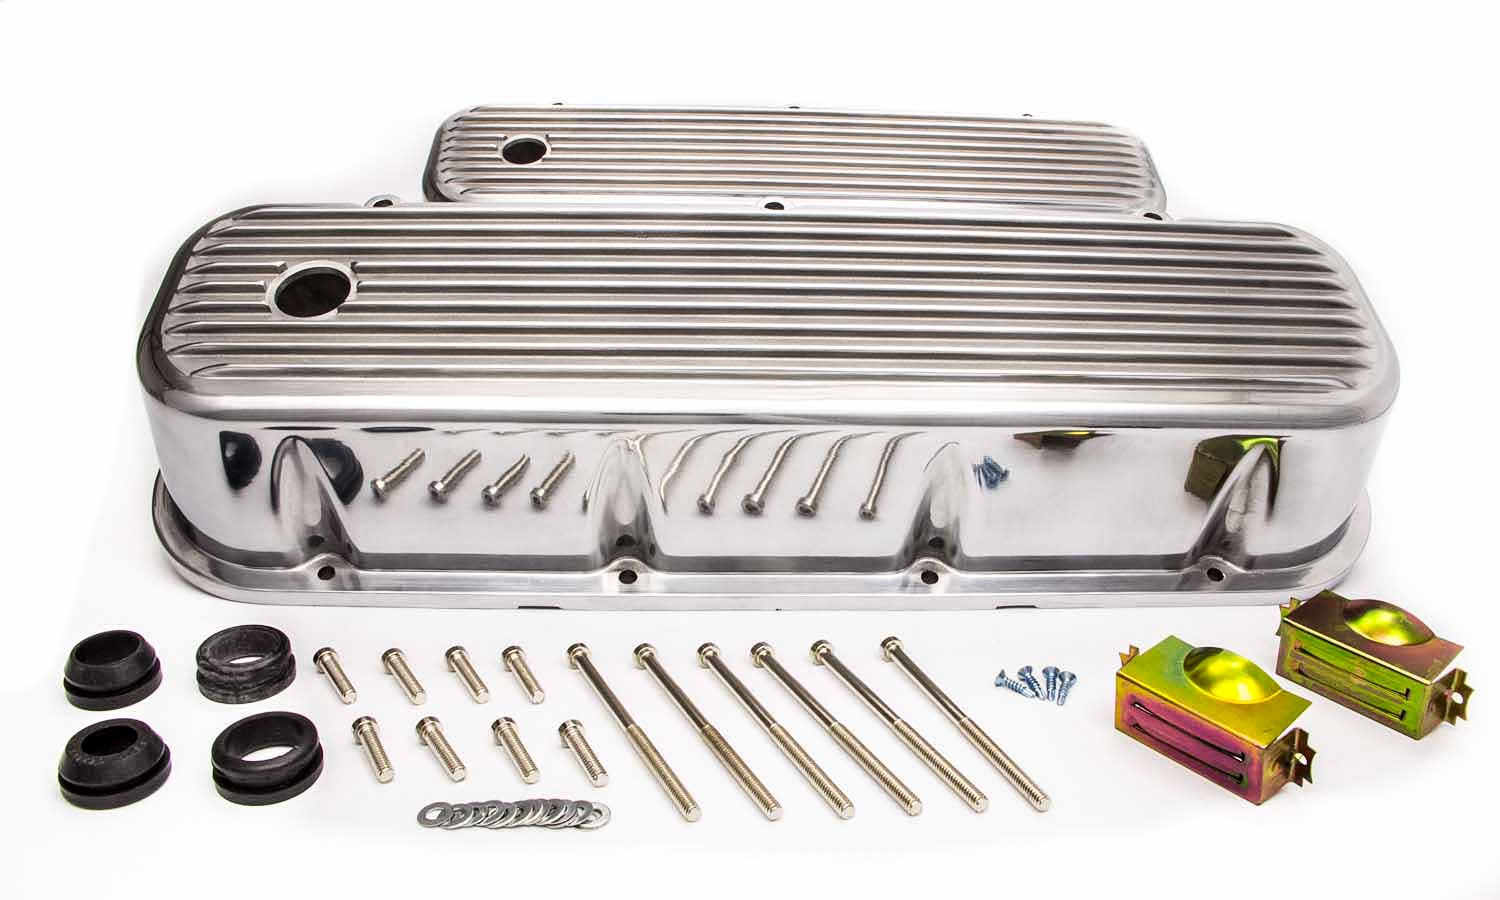 Racing Power Company R6230-1 Tall Plain Polished Aluminum Valve Cover for Big Block Chevy 